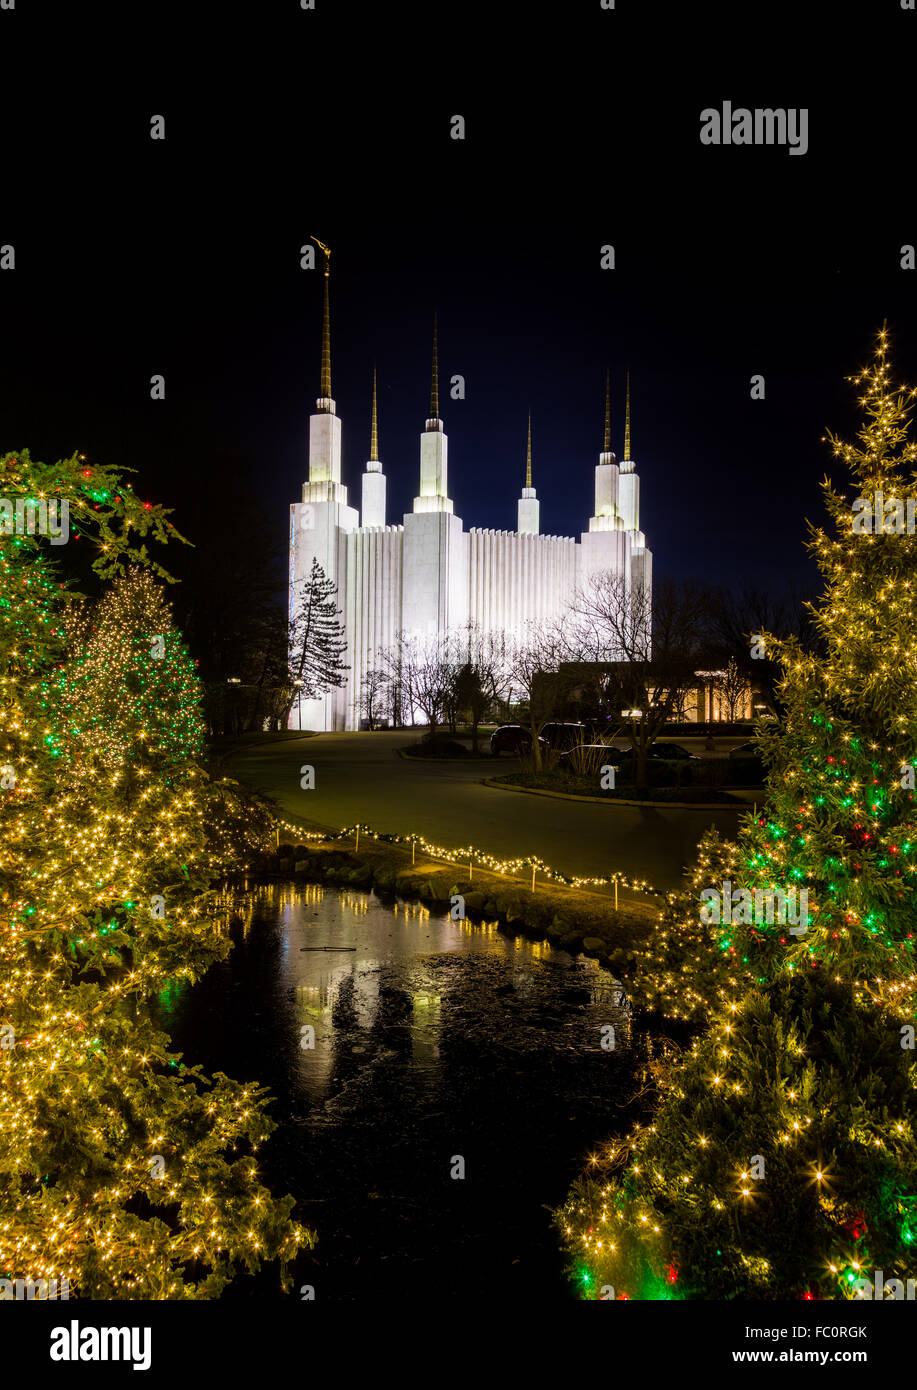 Mormon temple lights hires stock photography and images Alamy